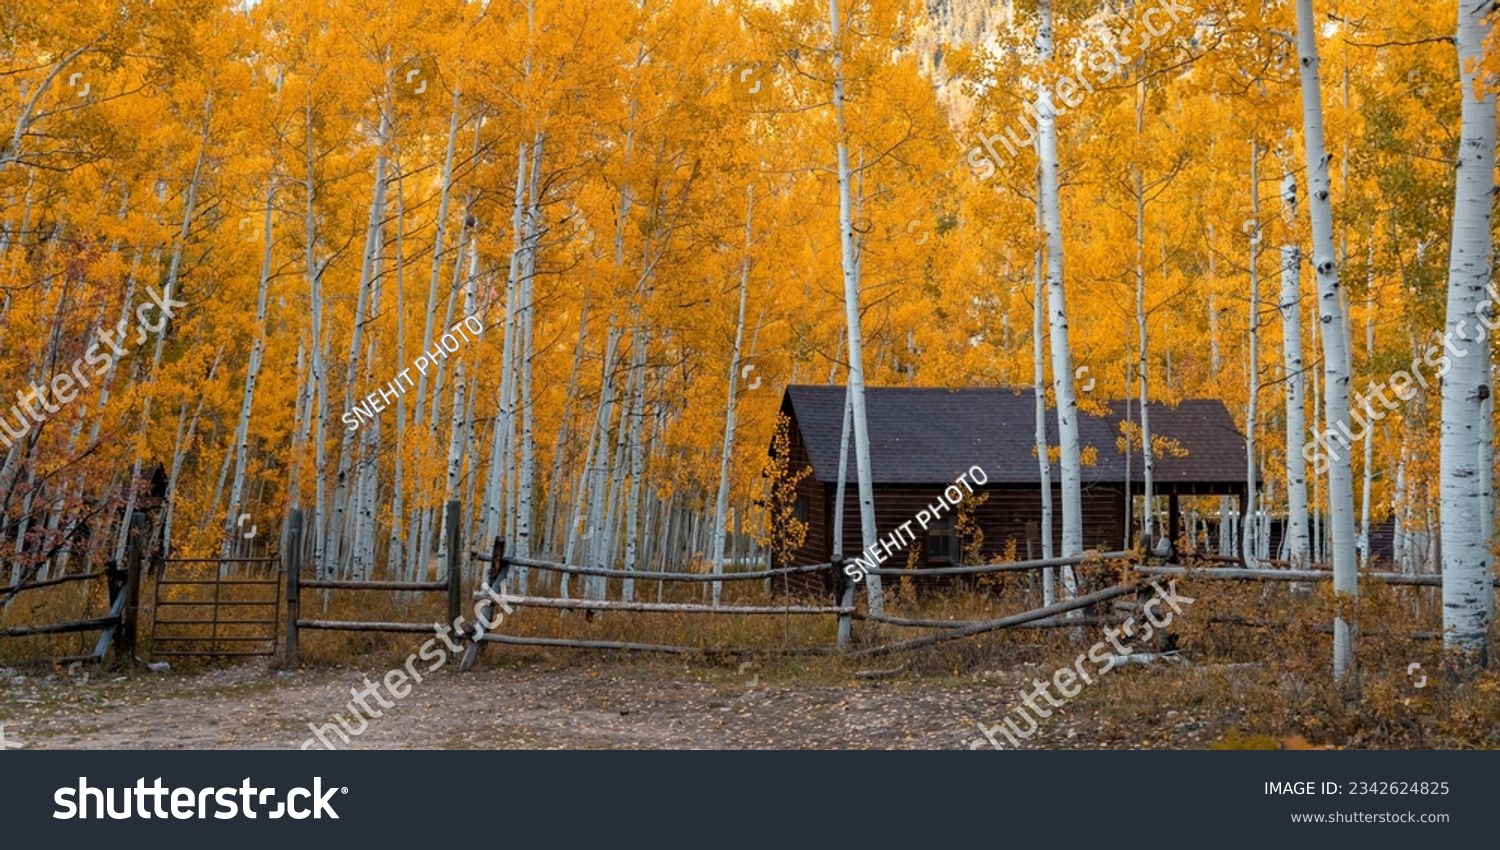 Panoramic view of tall Aspen trees around cabin in the Wasatch Cache National Forest. #2342624825